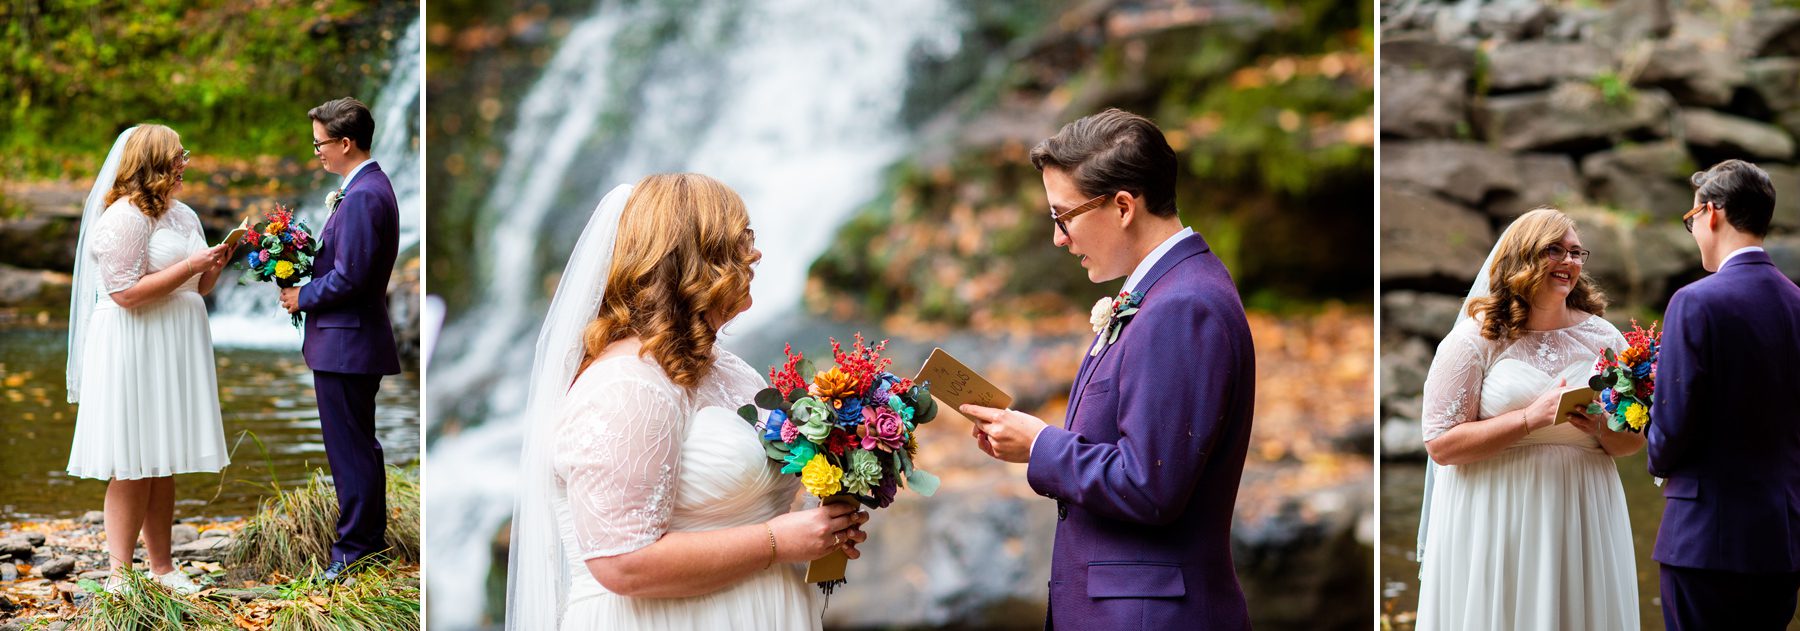 Exchanging Vows at Queer Wedding Ceremony 